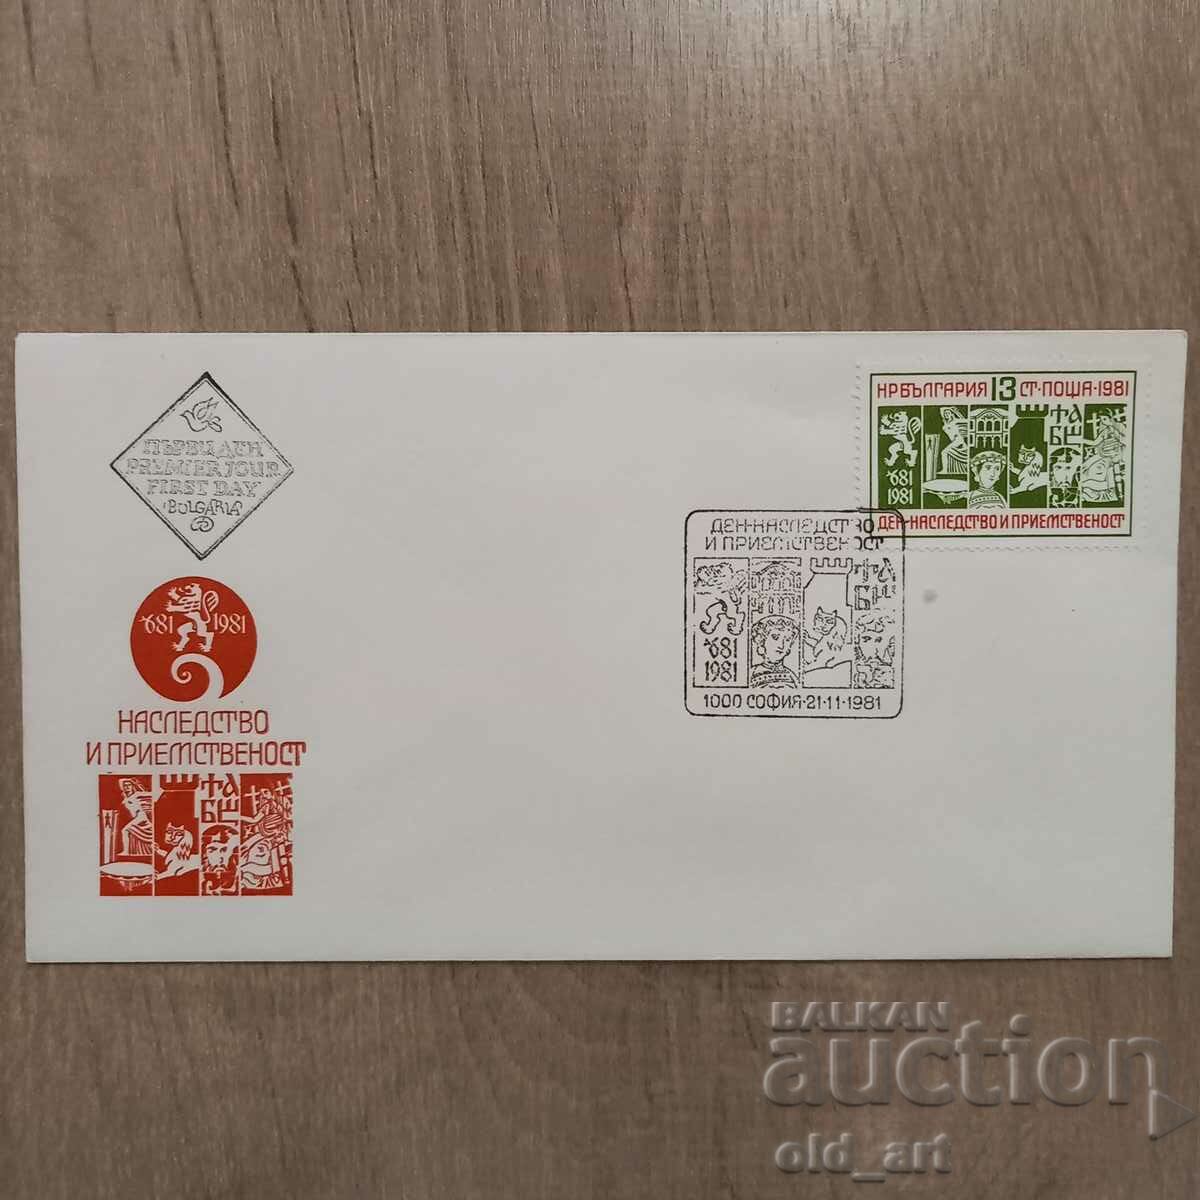 Mailing envelope - Heritage and Continuity Day